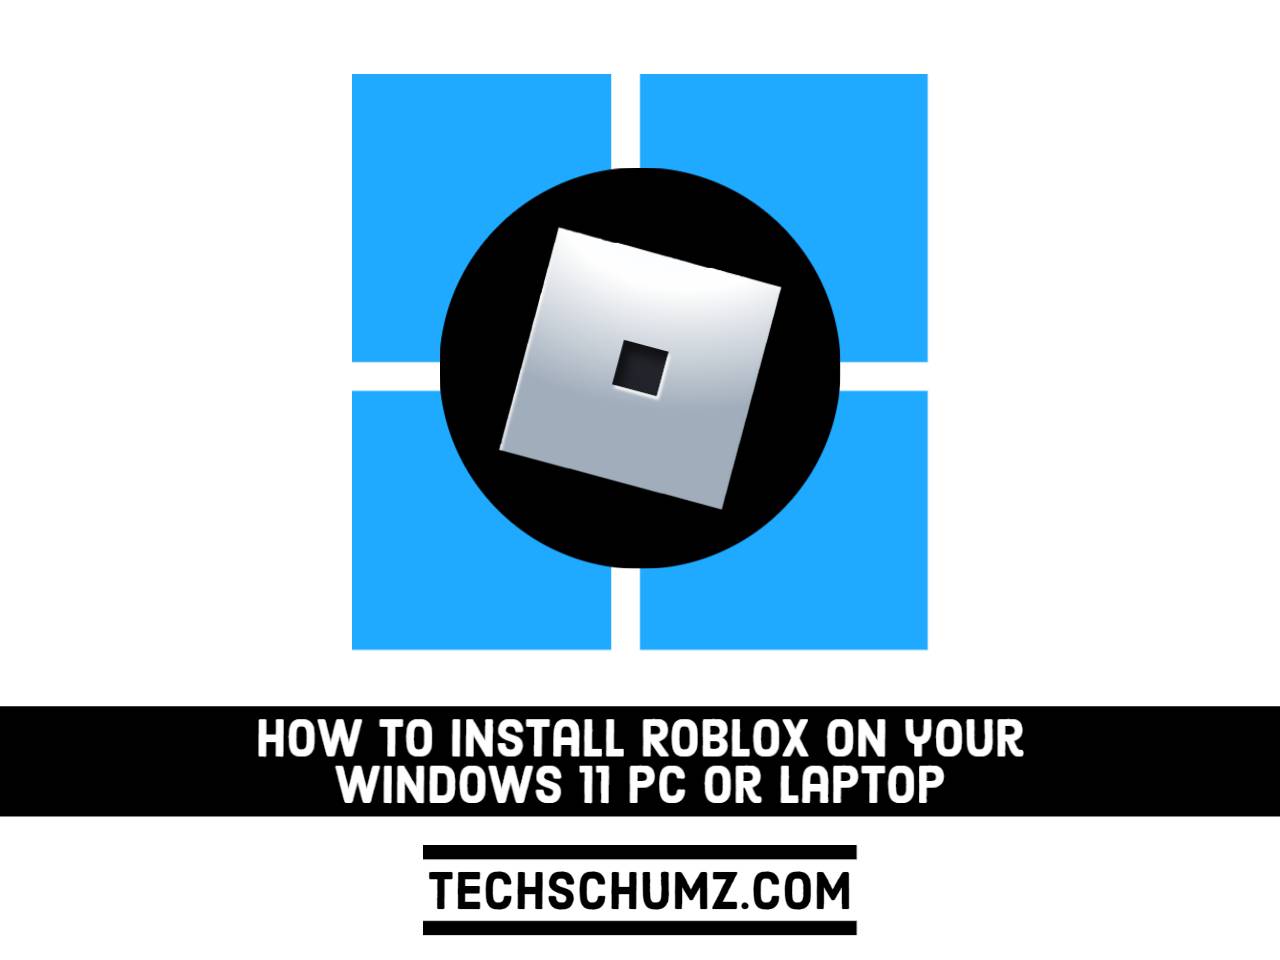 How to Install Roblox on Your Windows 11 PC or Laptop